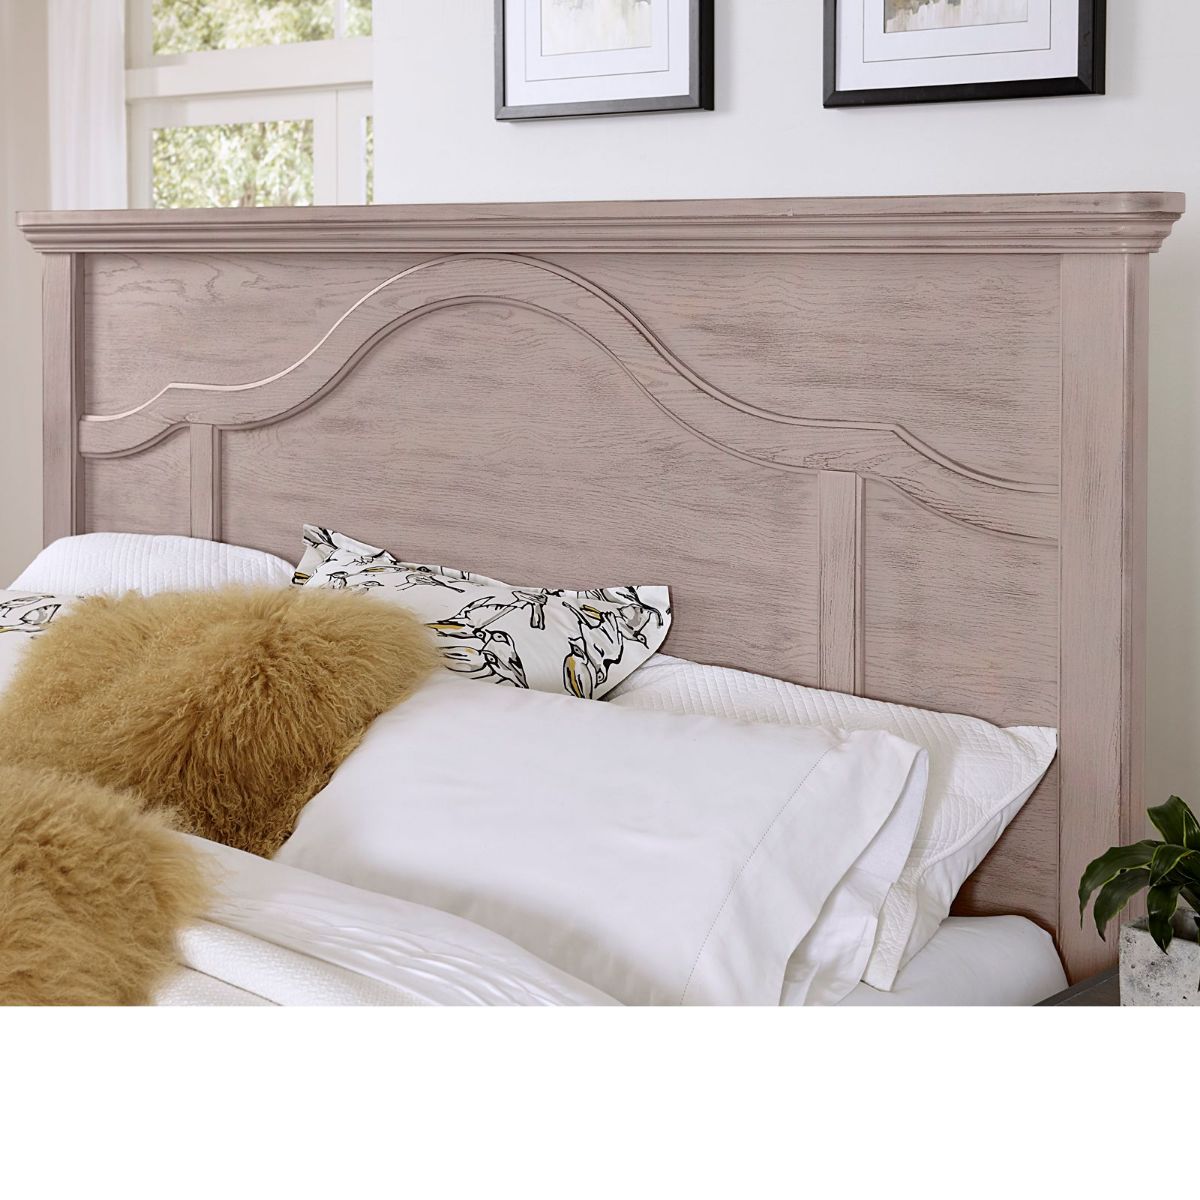 Picture of Bungalow Queen Mantel Bed